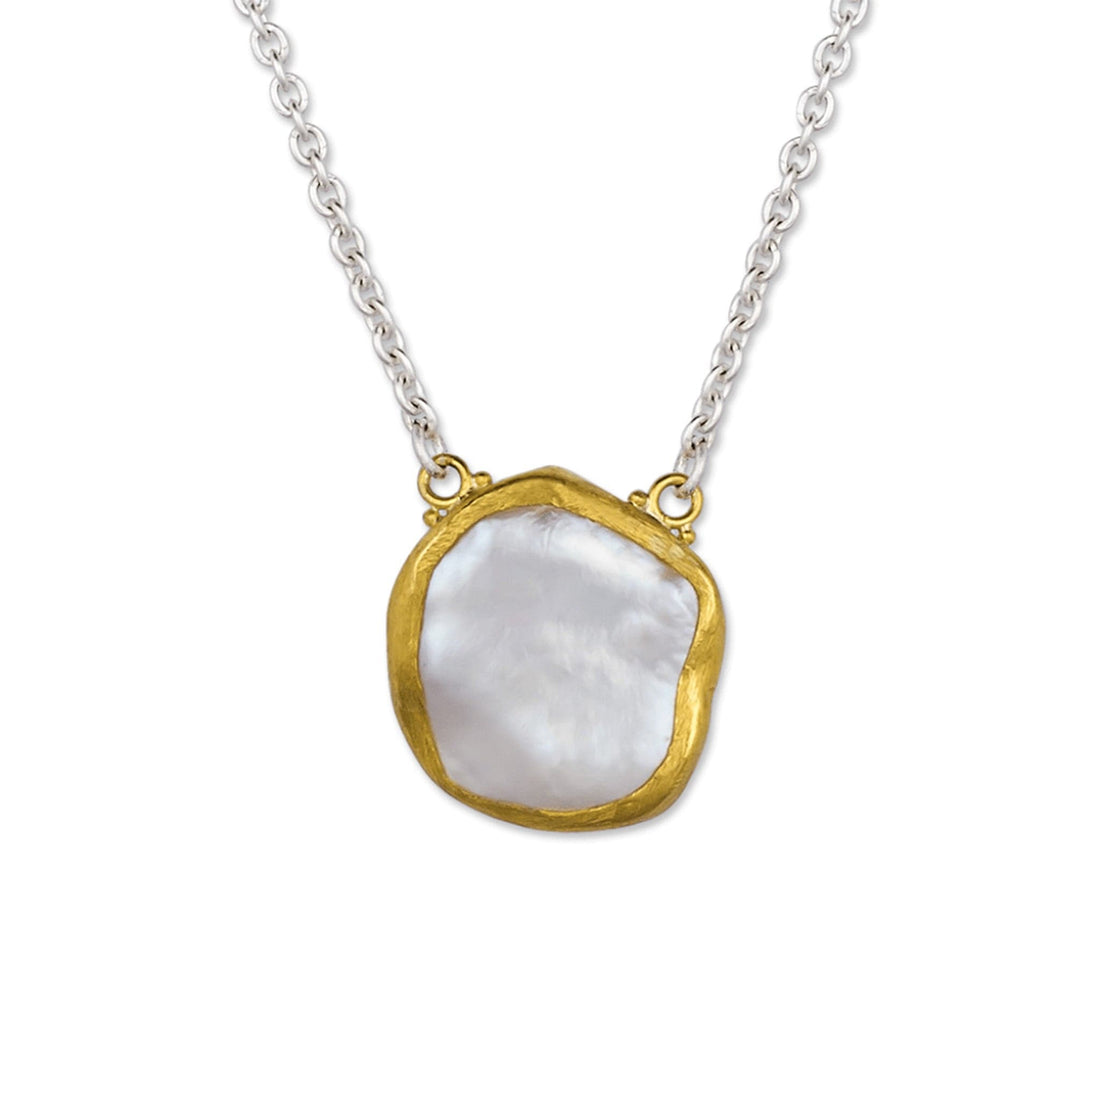 Keshi Pearl Necklace in Yellow Gold & High Polished Silver by Lika Behar